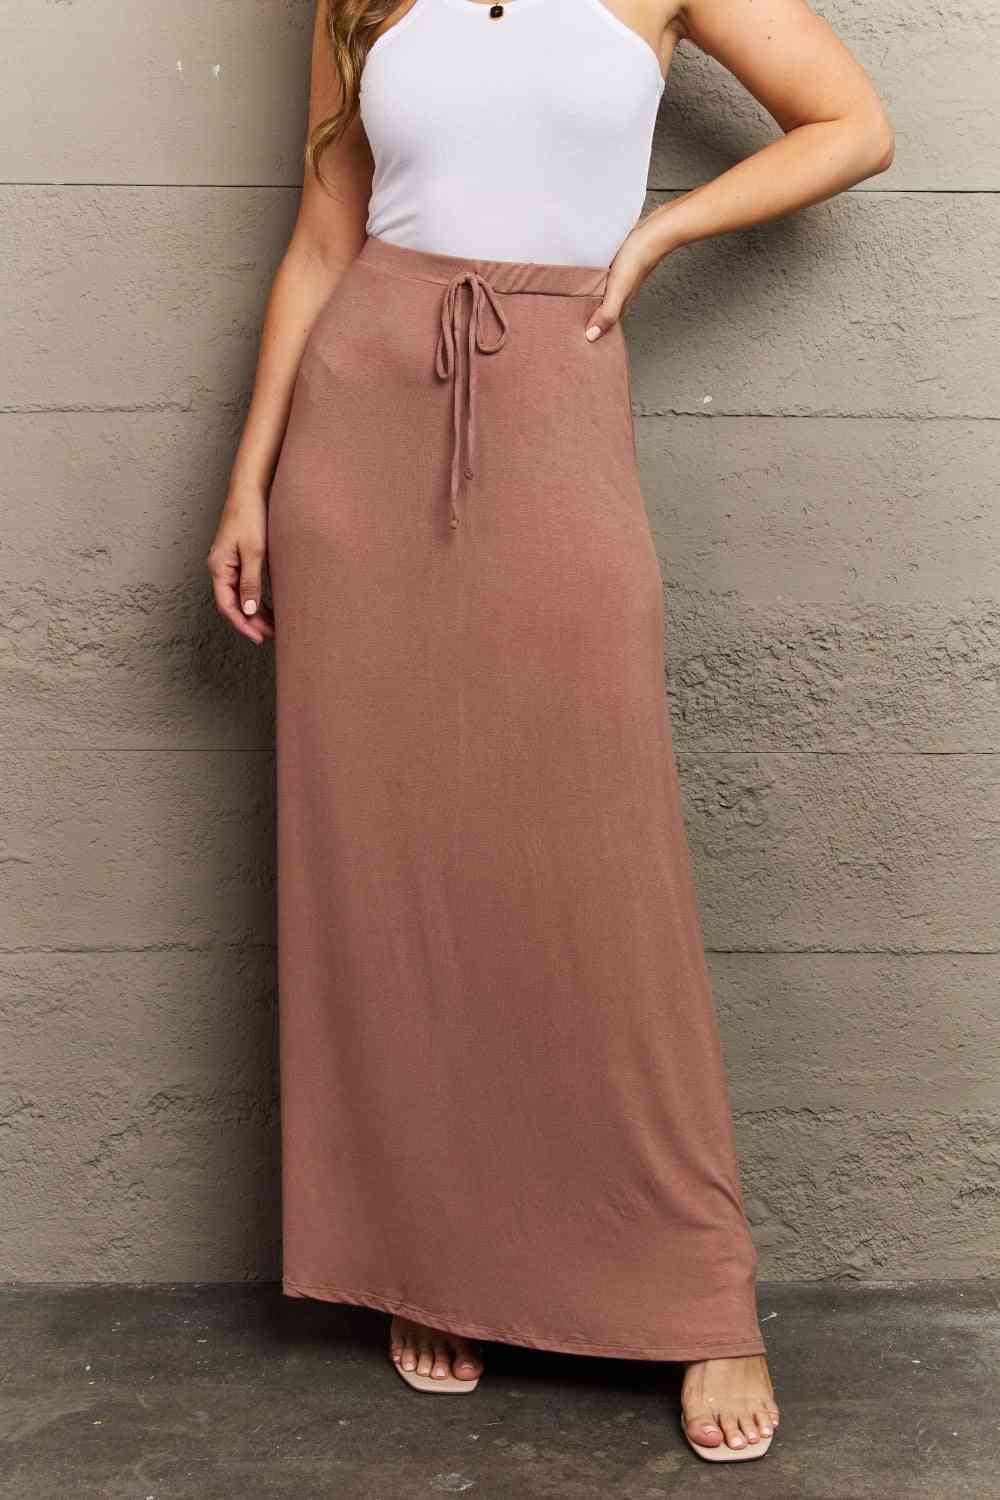 Dim Gray Culture Code For The Day Full Size Flare Maxi Skirt in Chocolate Sentient Beauty Fashions Apparel &amp; Accessories